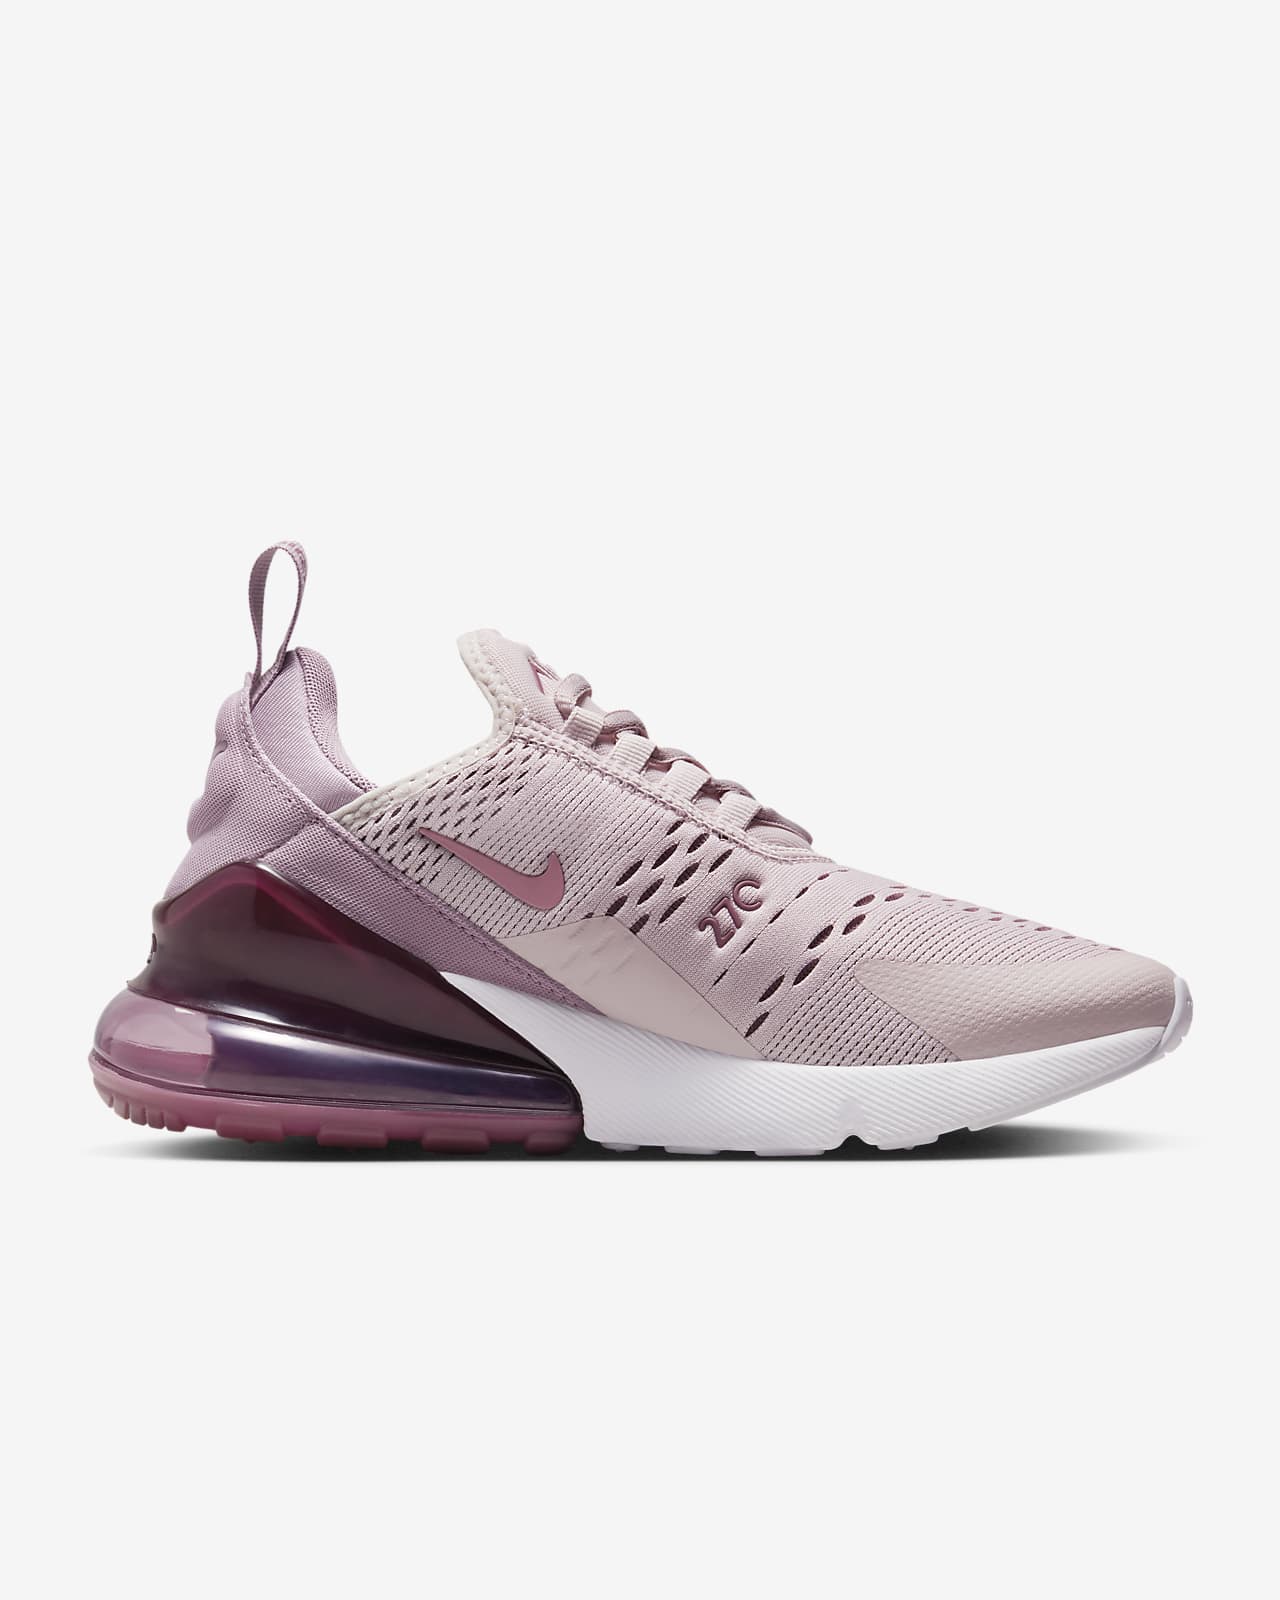 Chaussure Nike Max pour femme. Nike FR